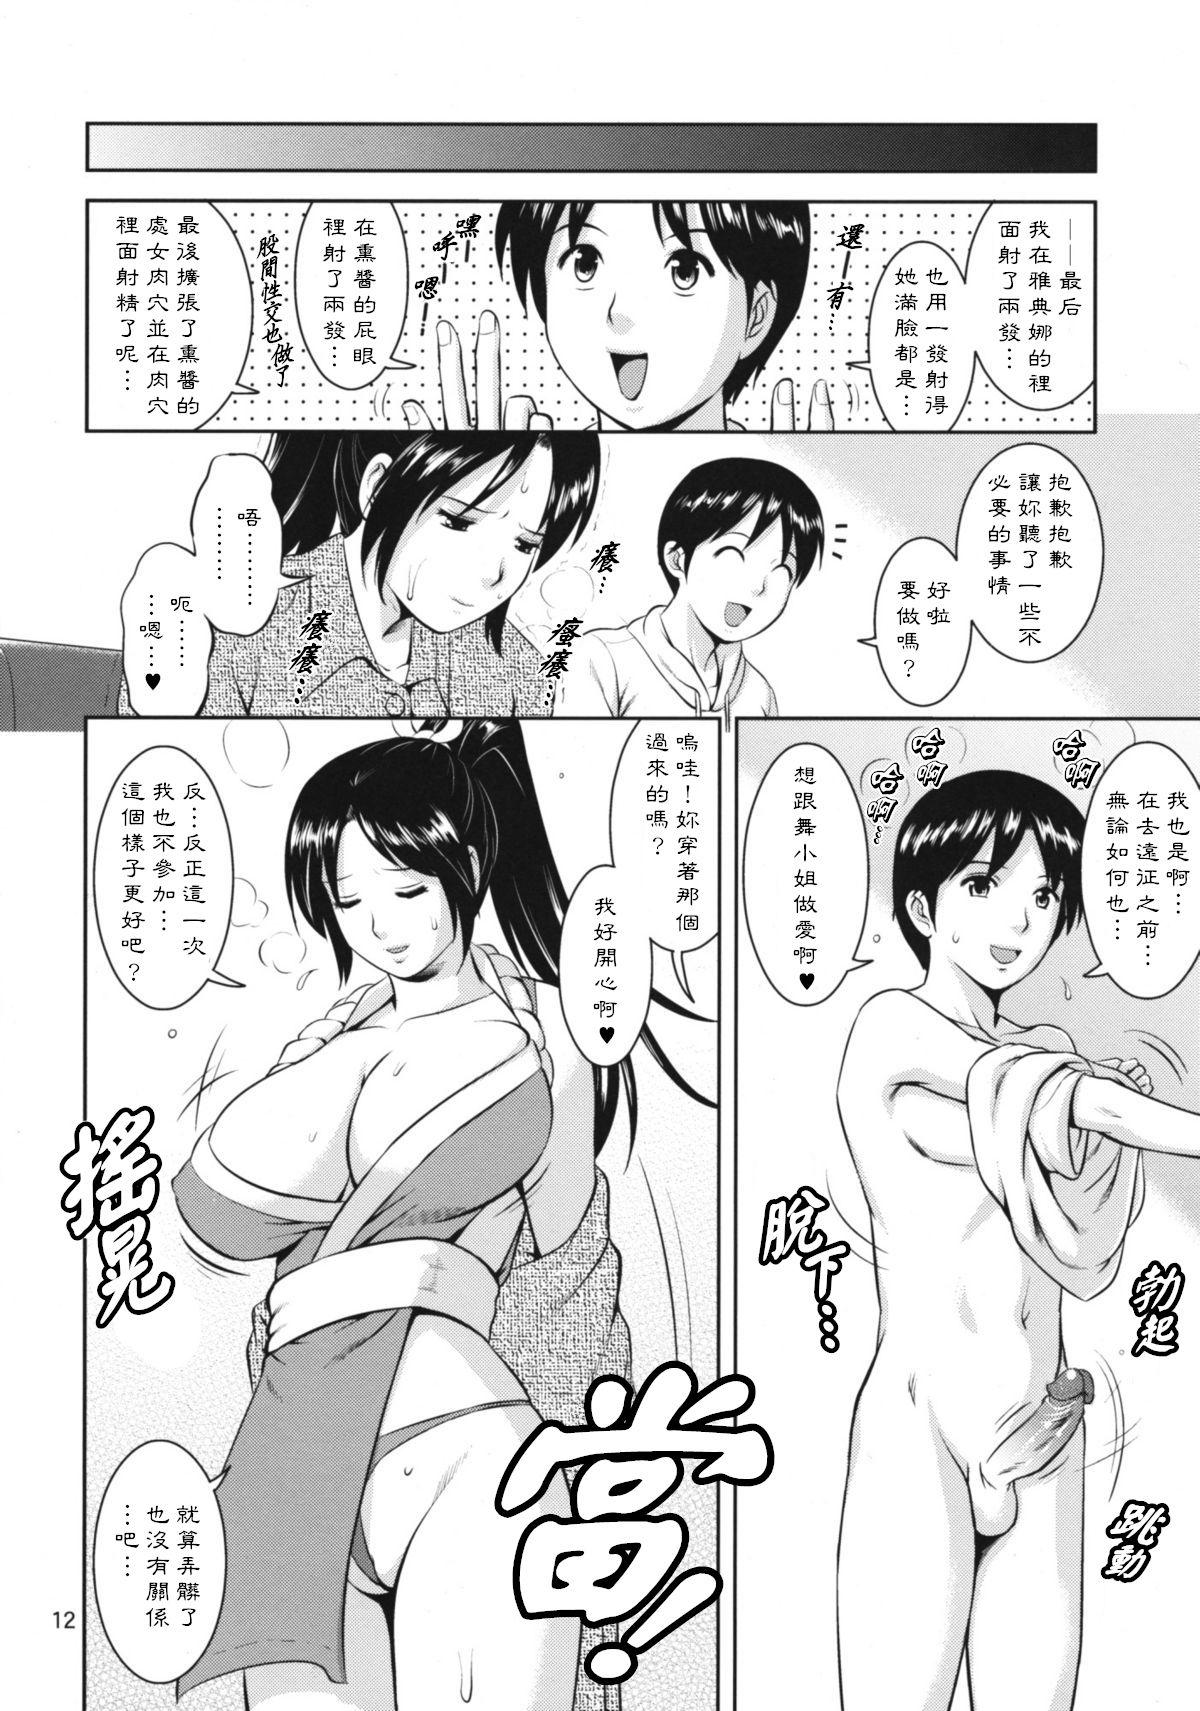 Wife The Yuri & Friends 2009 UM - Unparticipation of Mai - King of fighters White Chick - Page 11